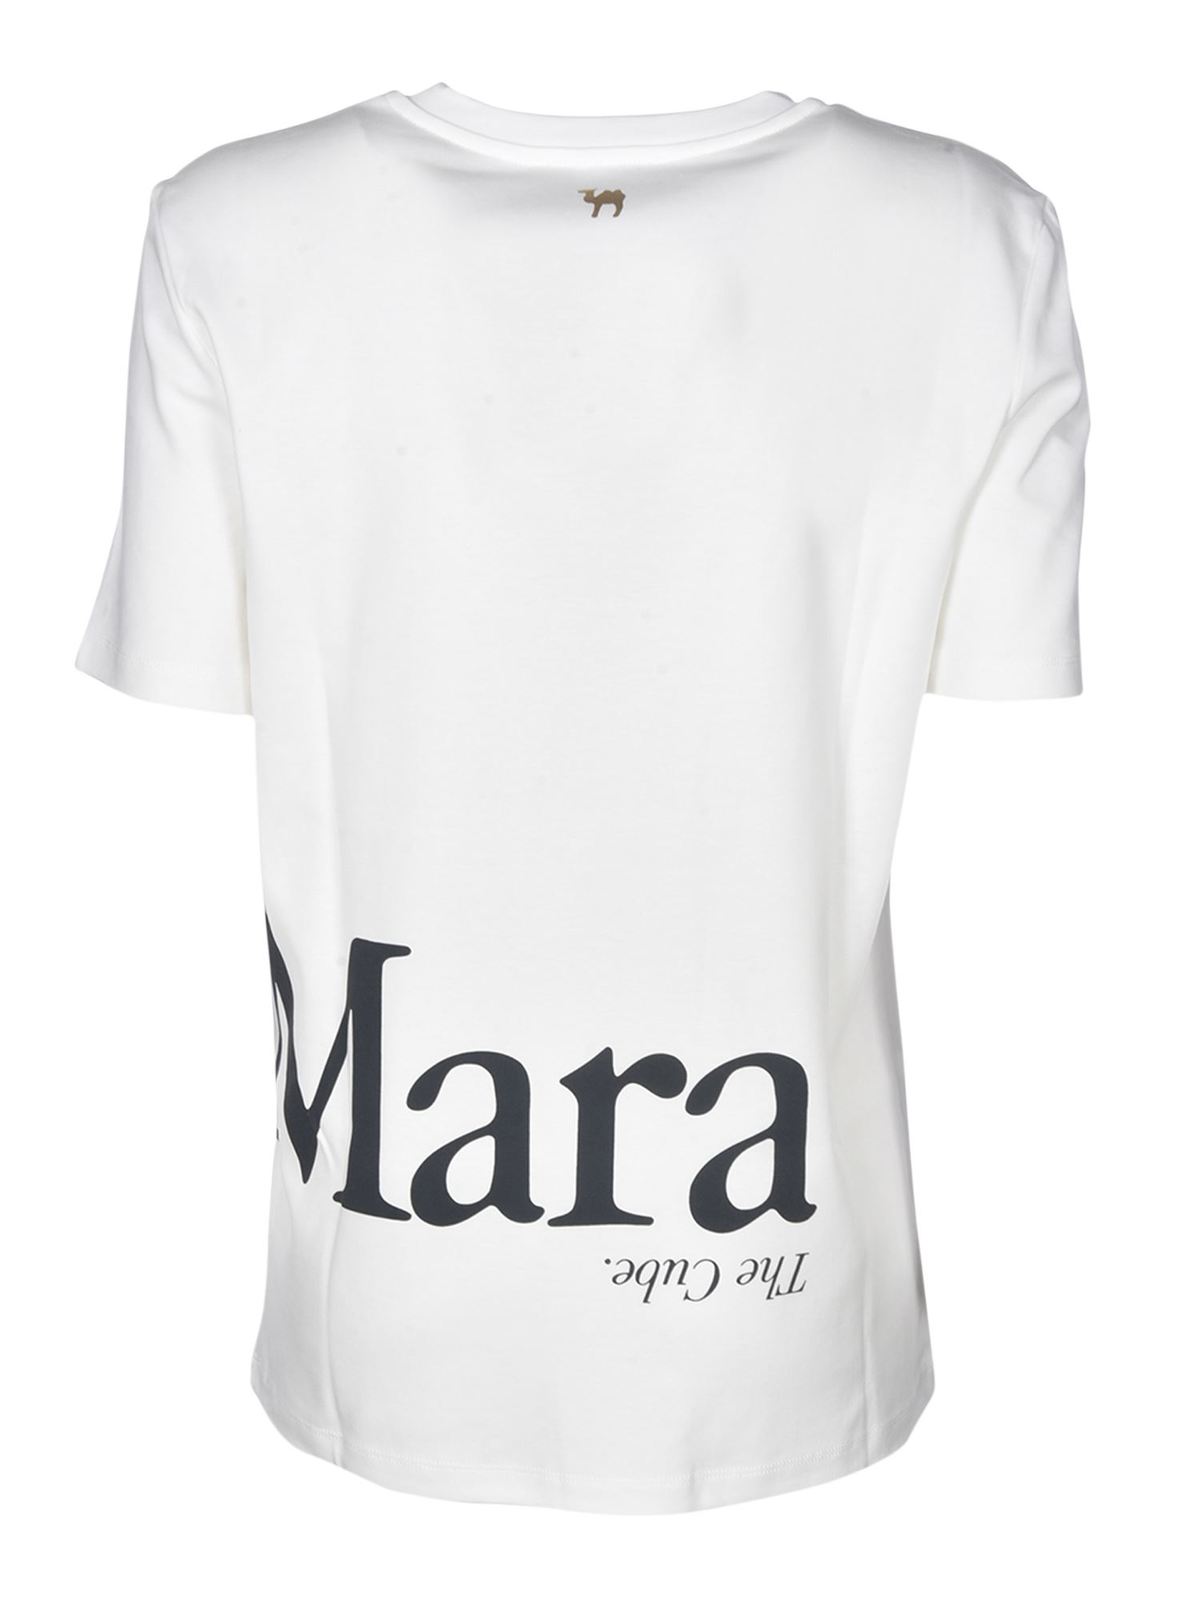 The Cube T-shirt in white